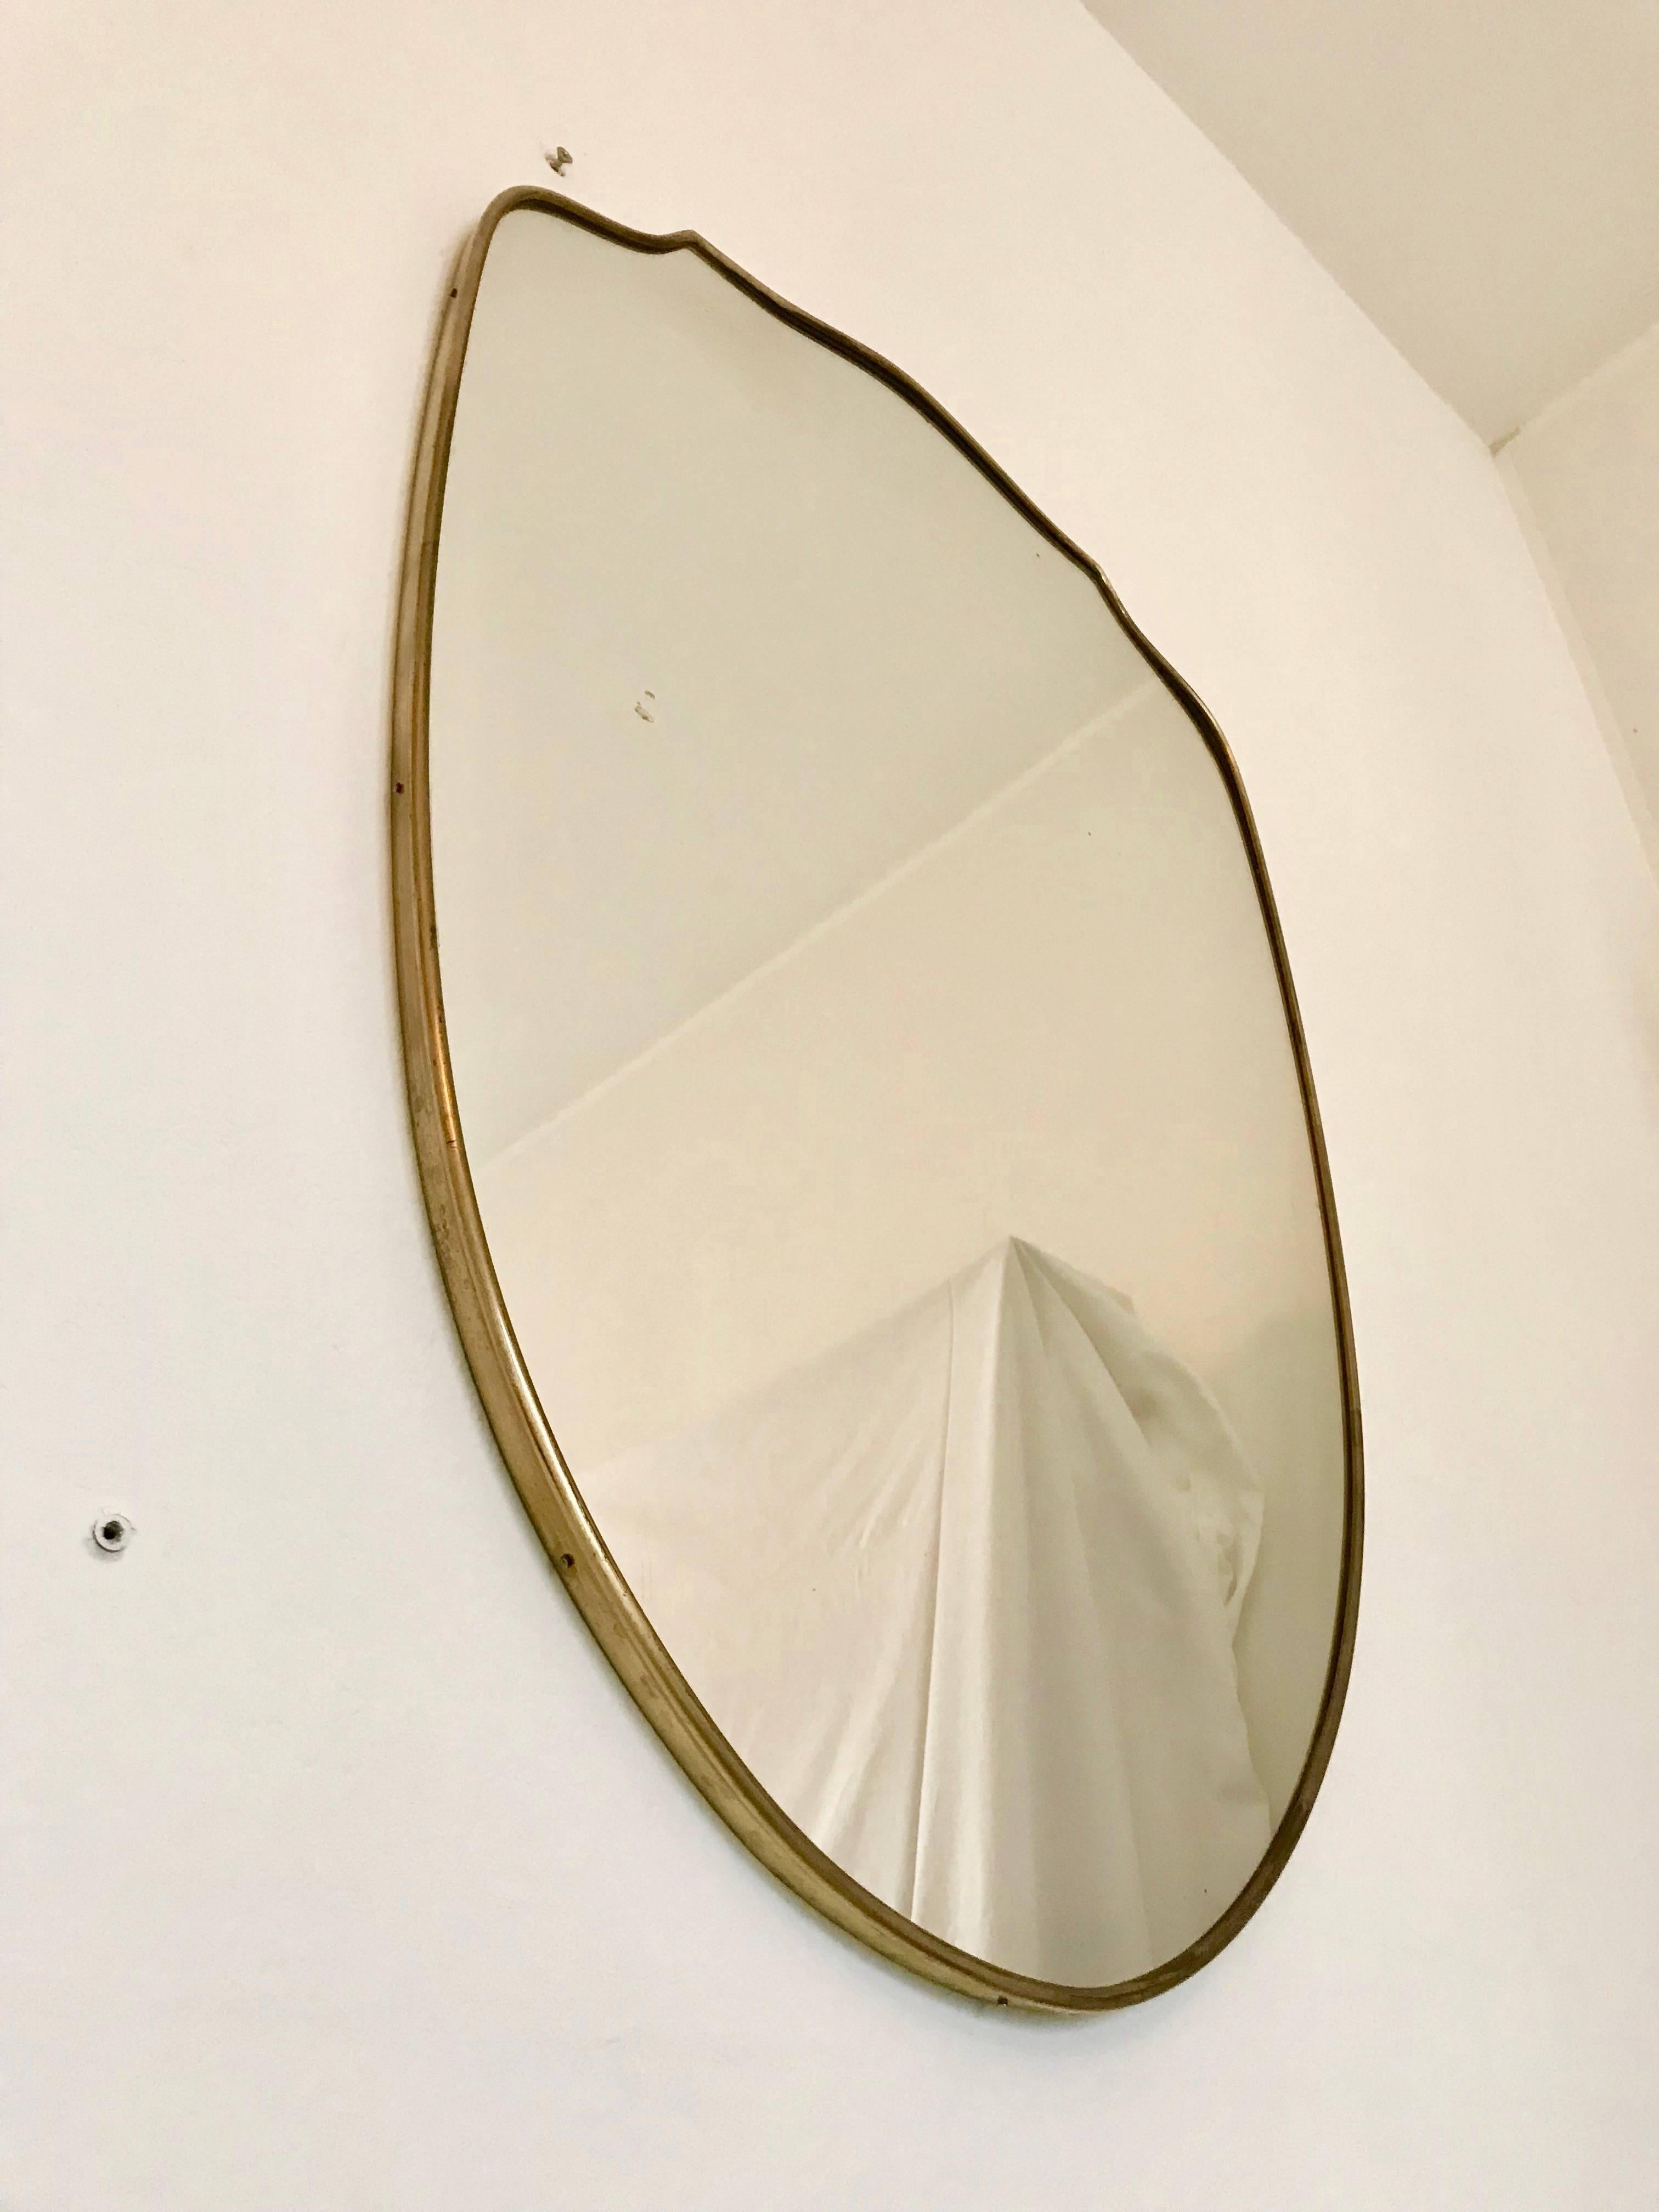 Authentic Italian Brass Mirror from the Mid Century period, original condition in the style of Gio Ponti. The mirror presents some signs which is completely normal due to age and a direct testimony of its intact authenticity. Approx size 78h x 56 cm